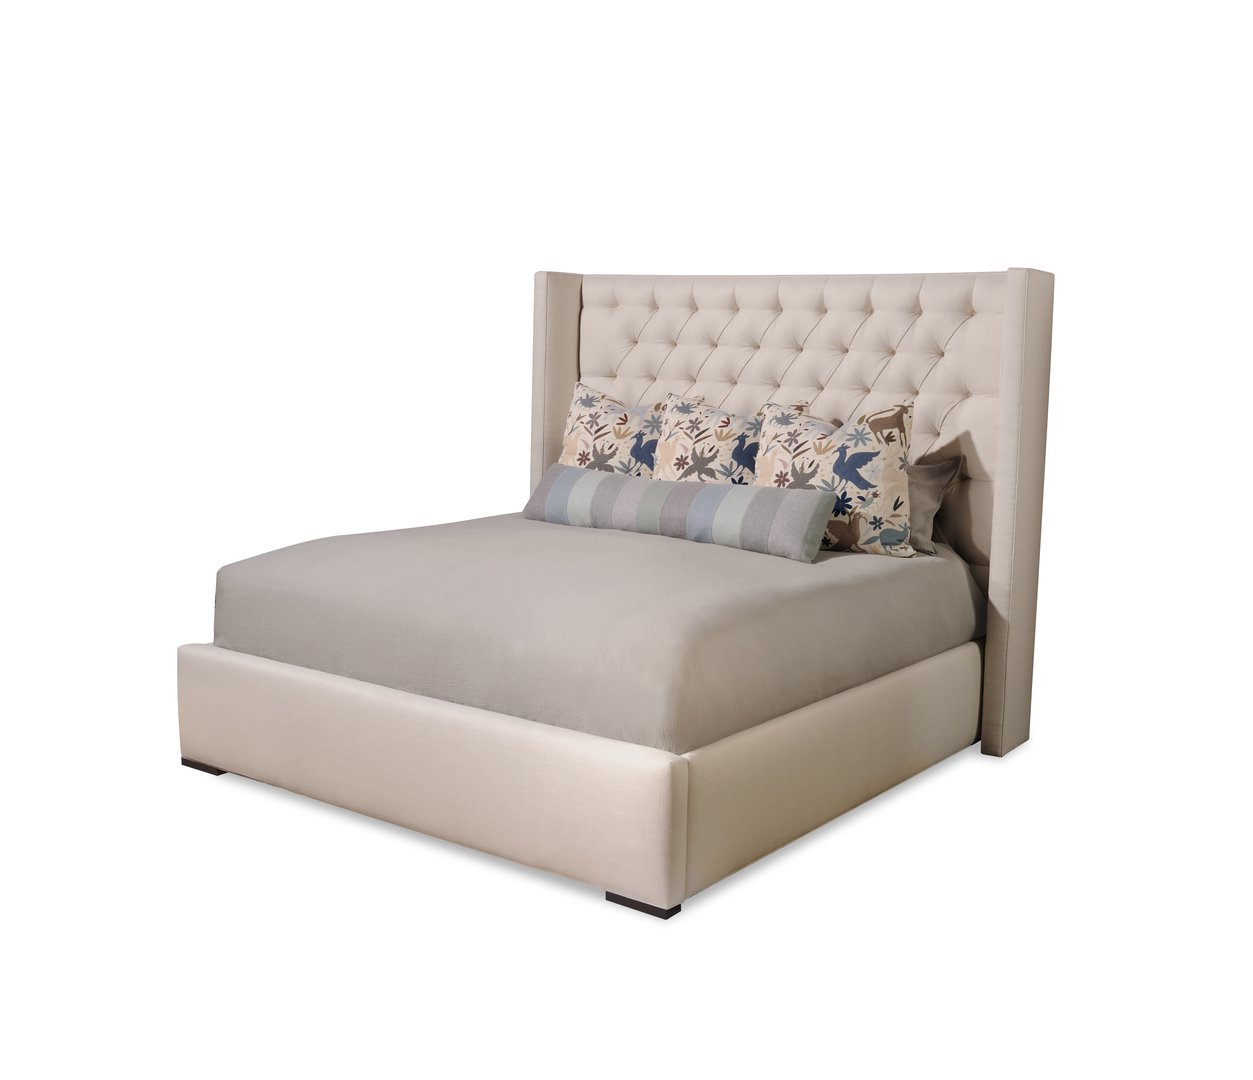 Taylor Made King Bed-Winged-To Floor Image